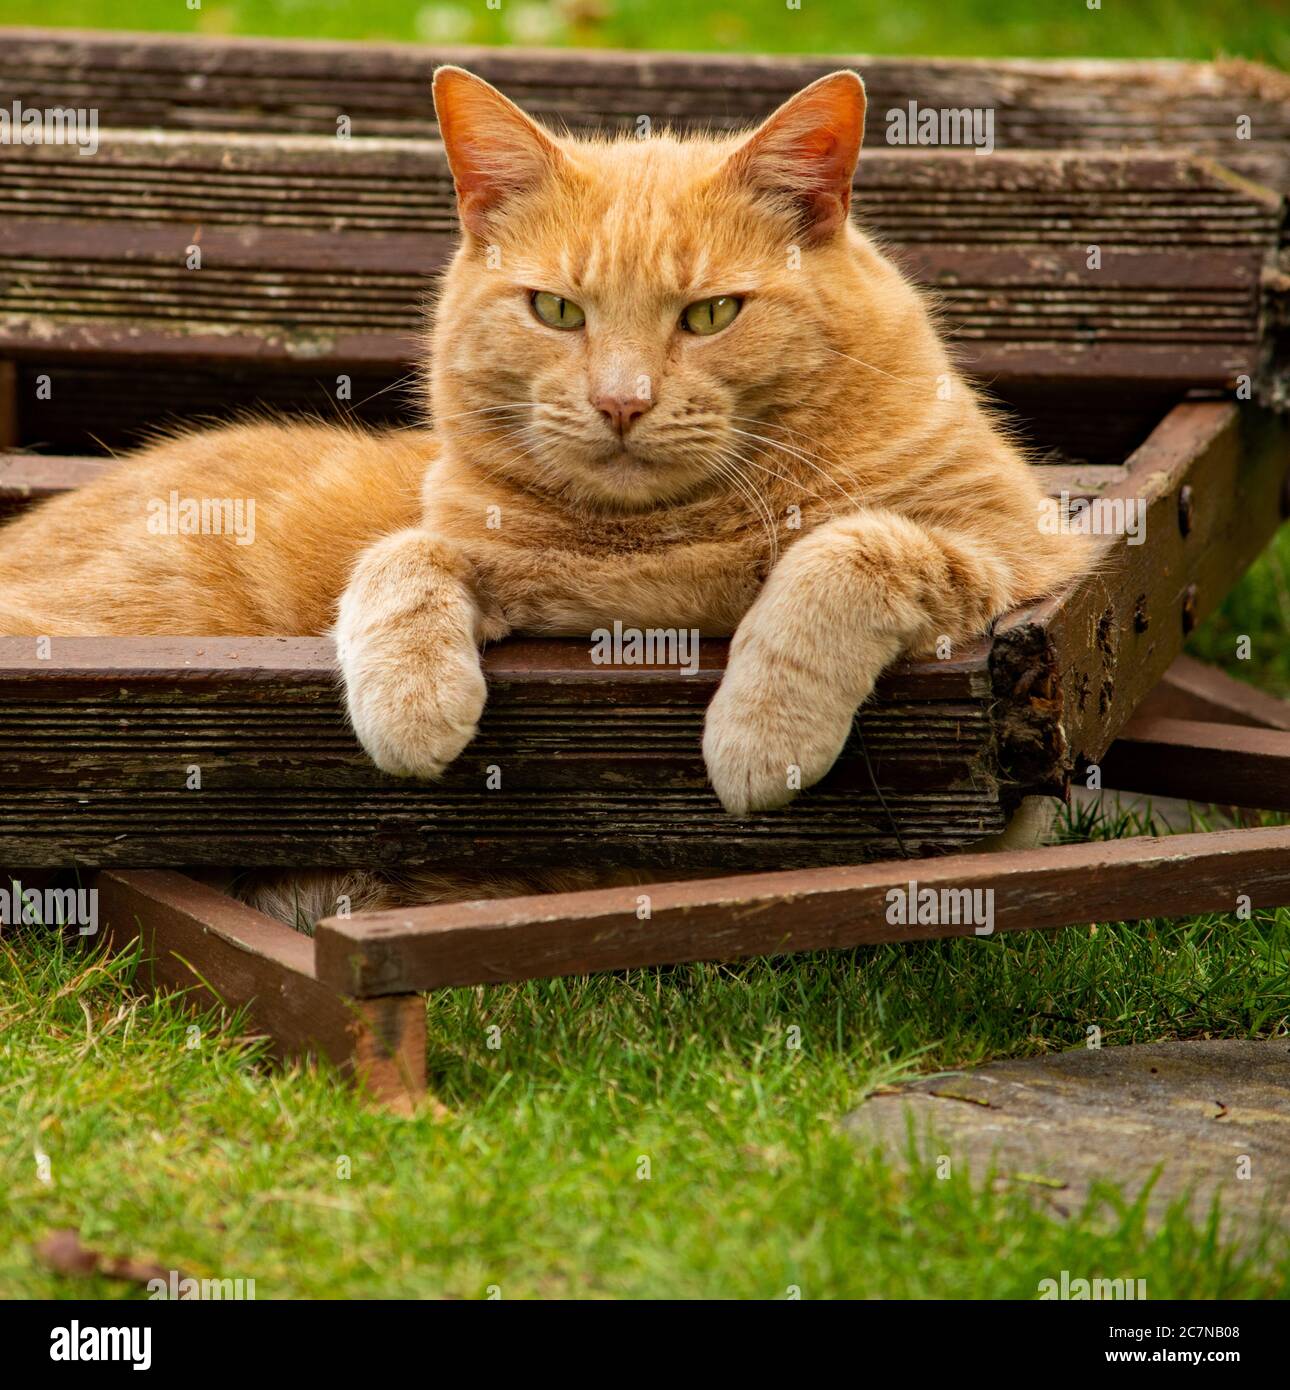 Cat in a woodpile Stock Photo